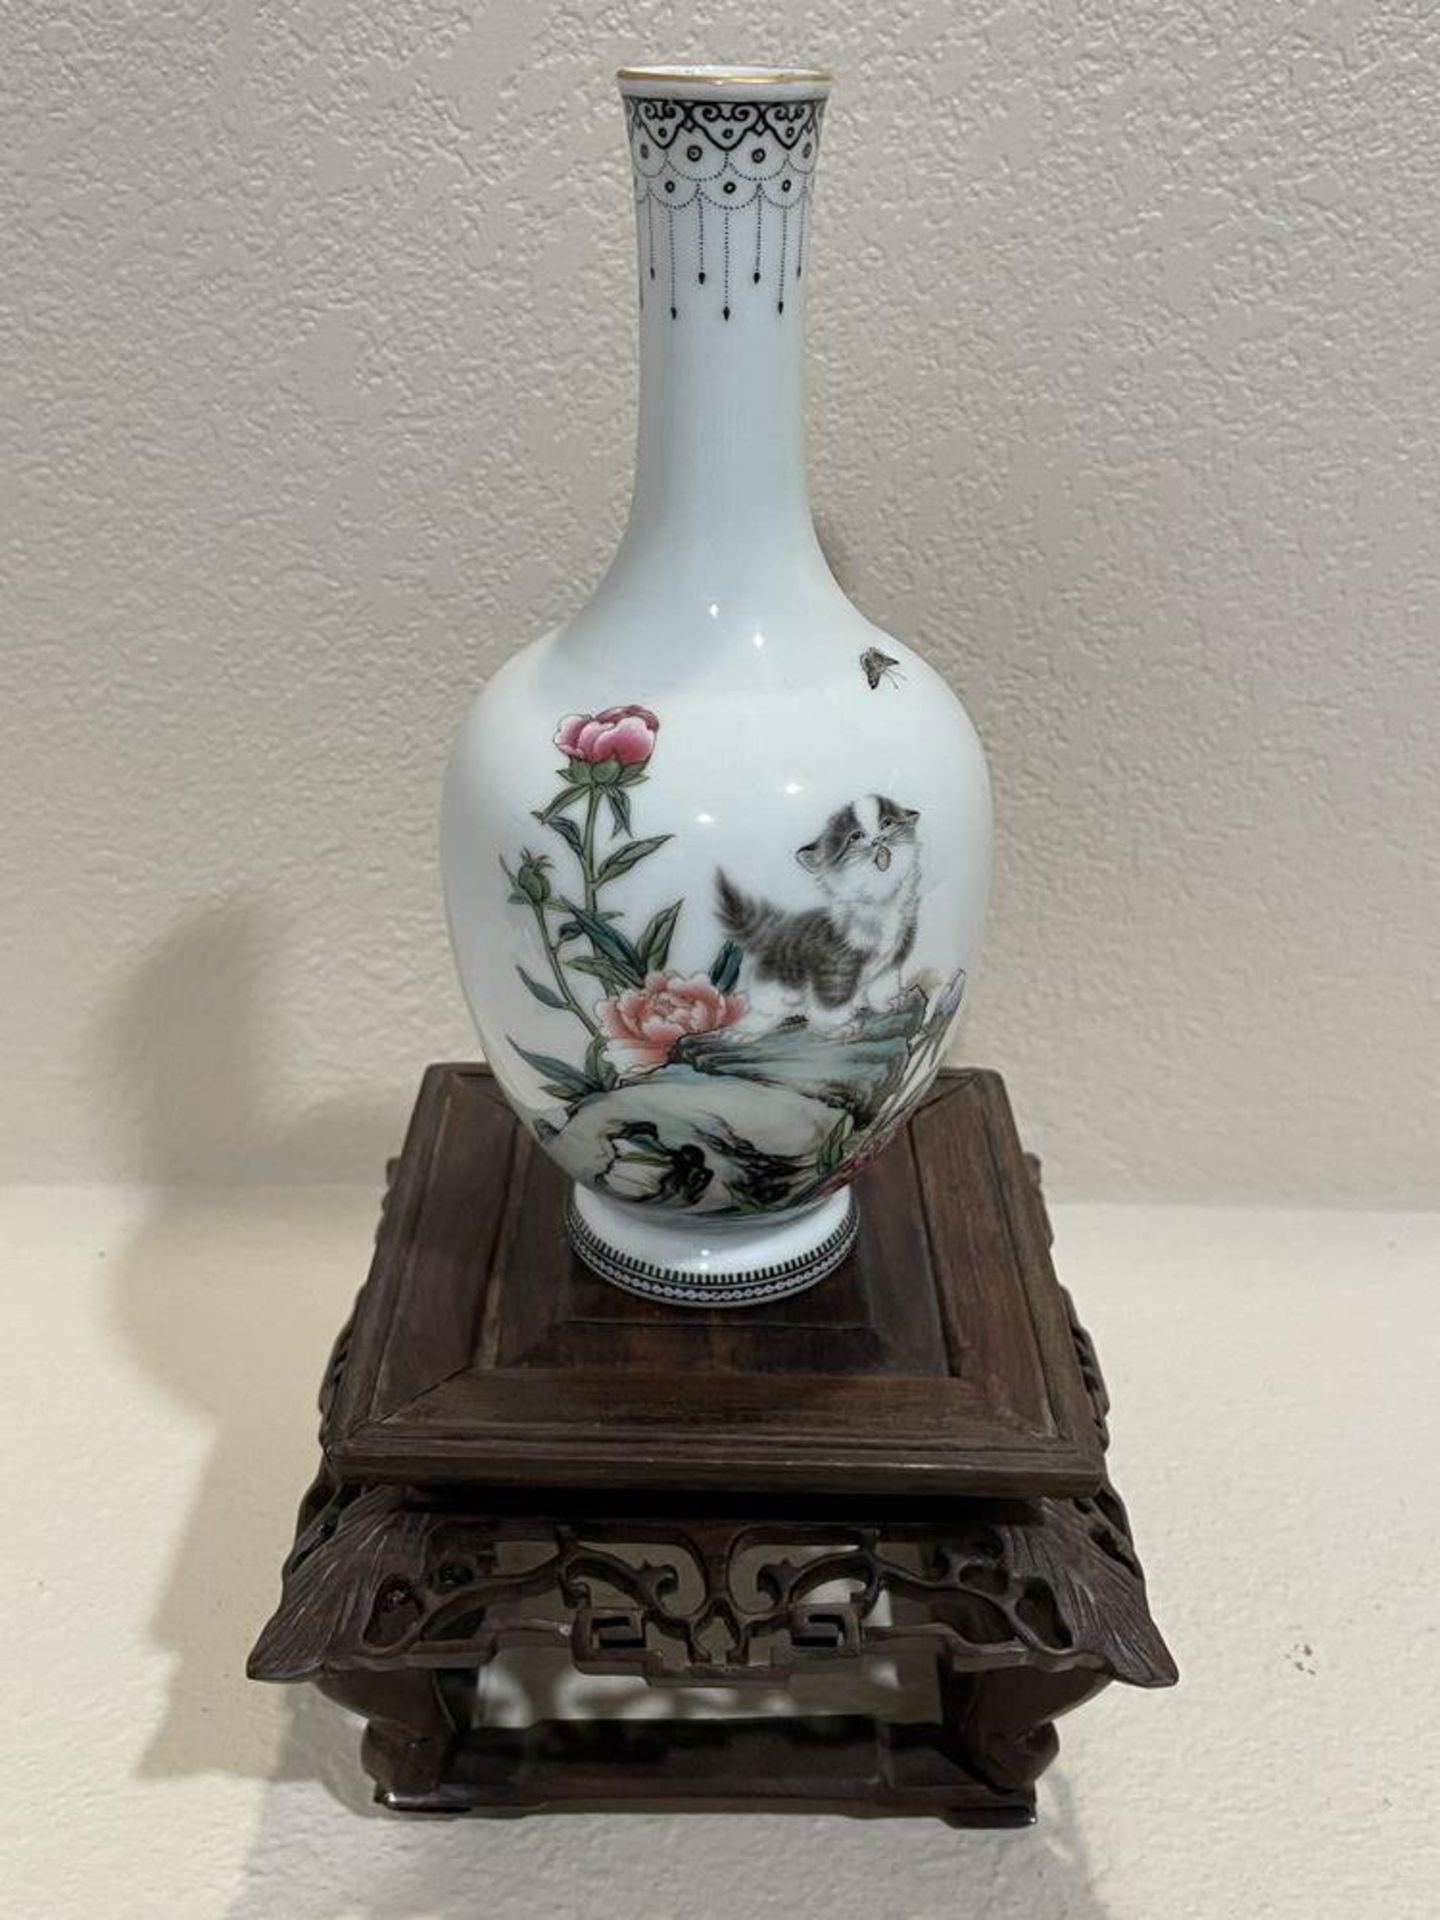 White East Asian Porcelin Vase with Cat and Flowers, Wood Base - 7" x 3.5" Vase, with base 10" x 5.5 - Image 2 of 8